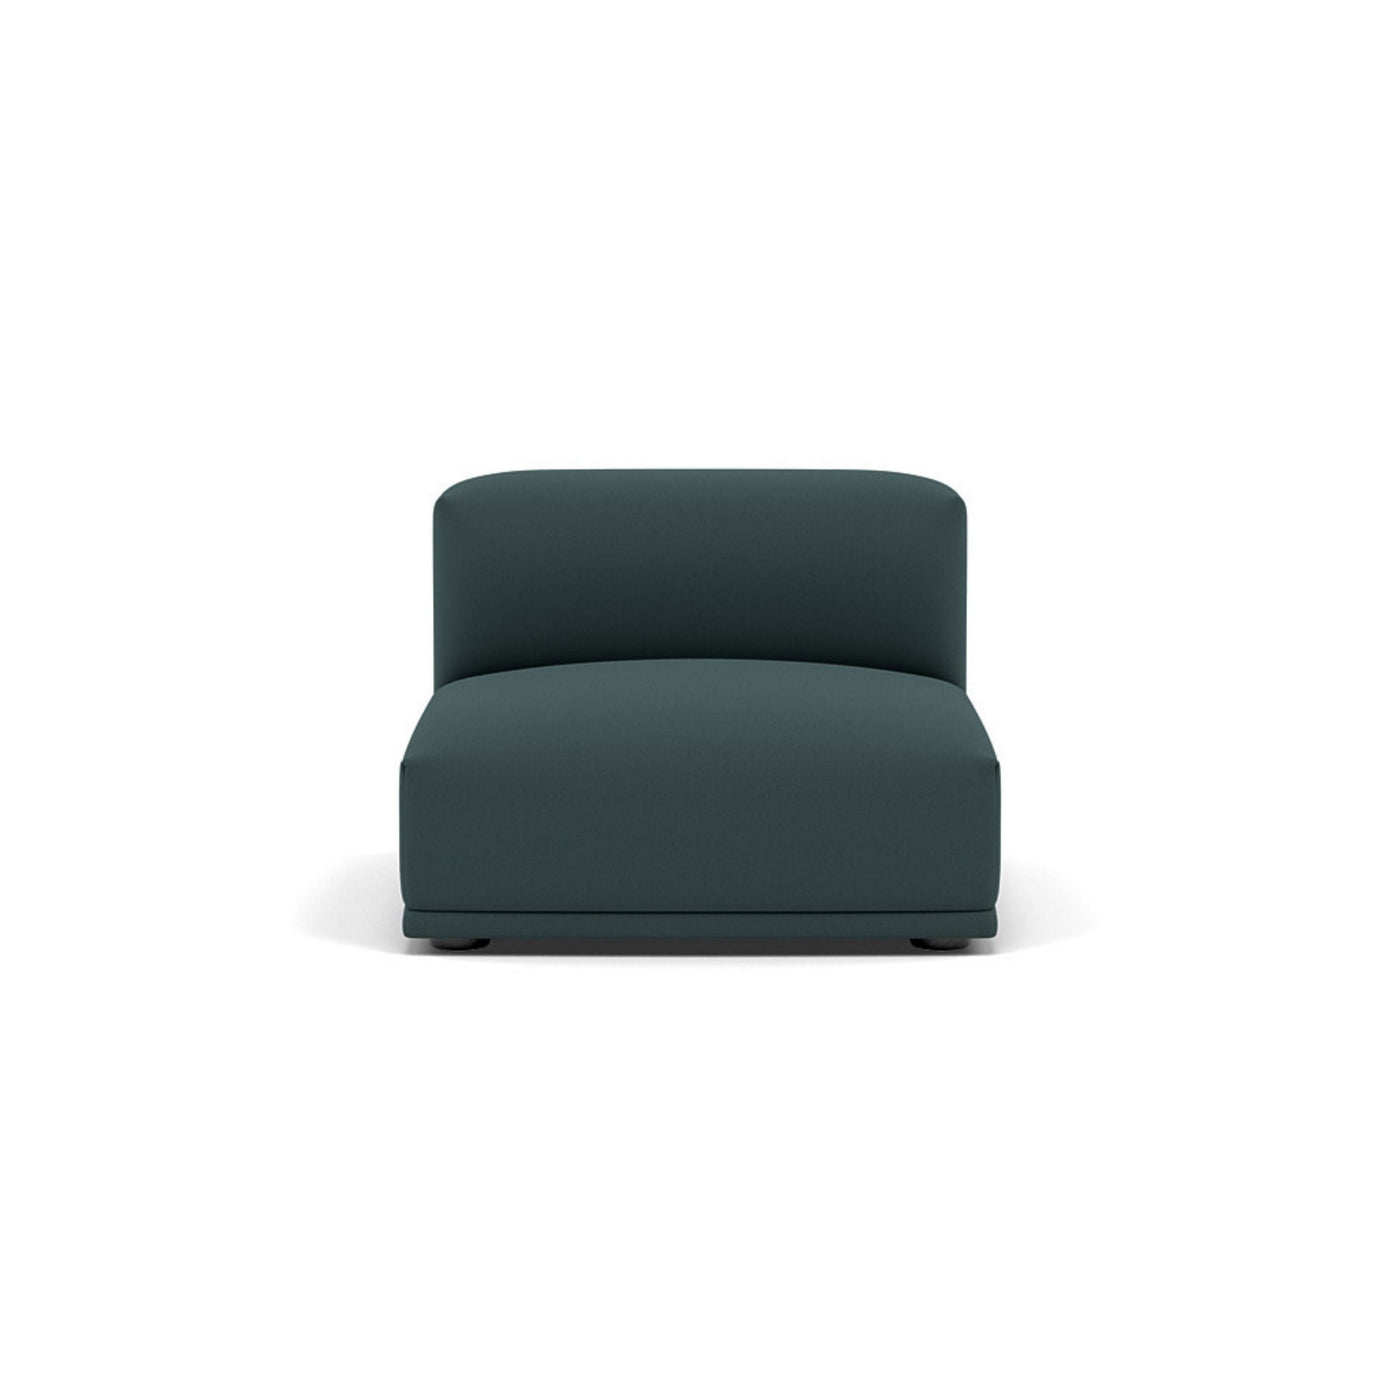 Muuto Connect Modular Sofa System, module d, short centre., steelcut 180 green fabric. Available from someday designs. #colour_steelcut-180